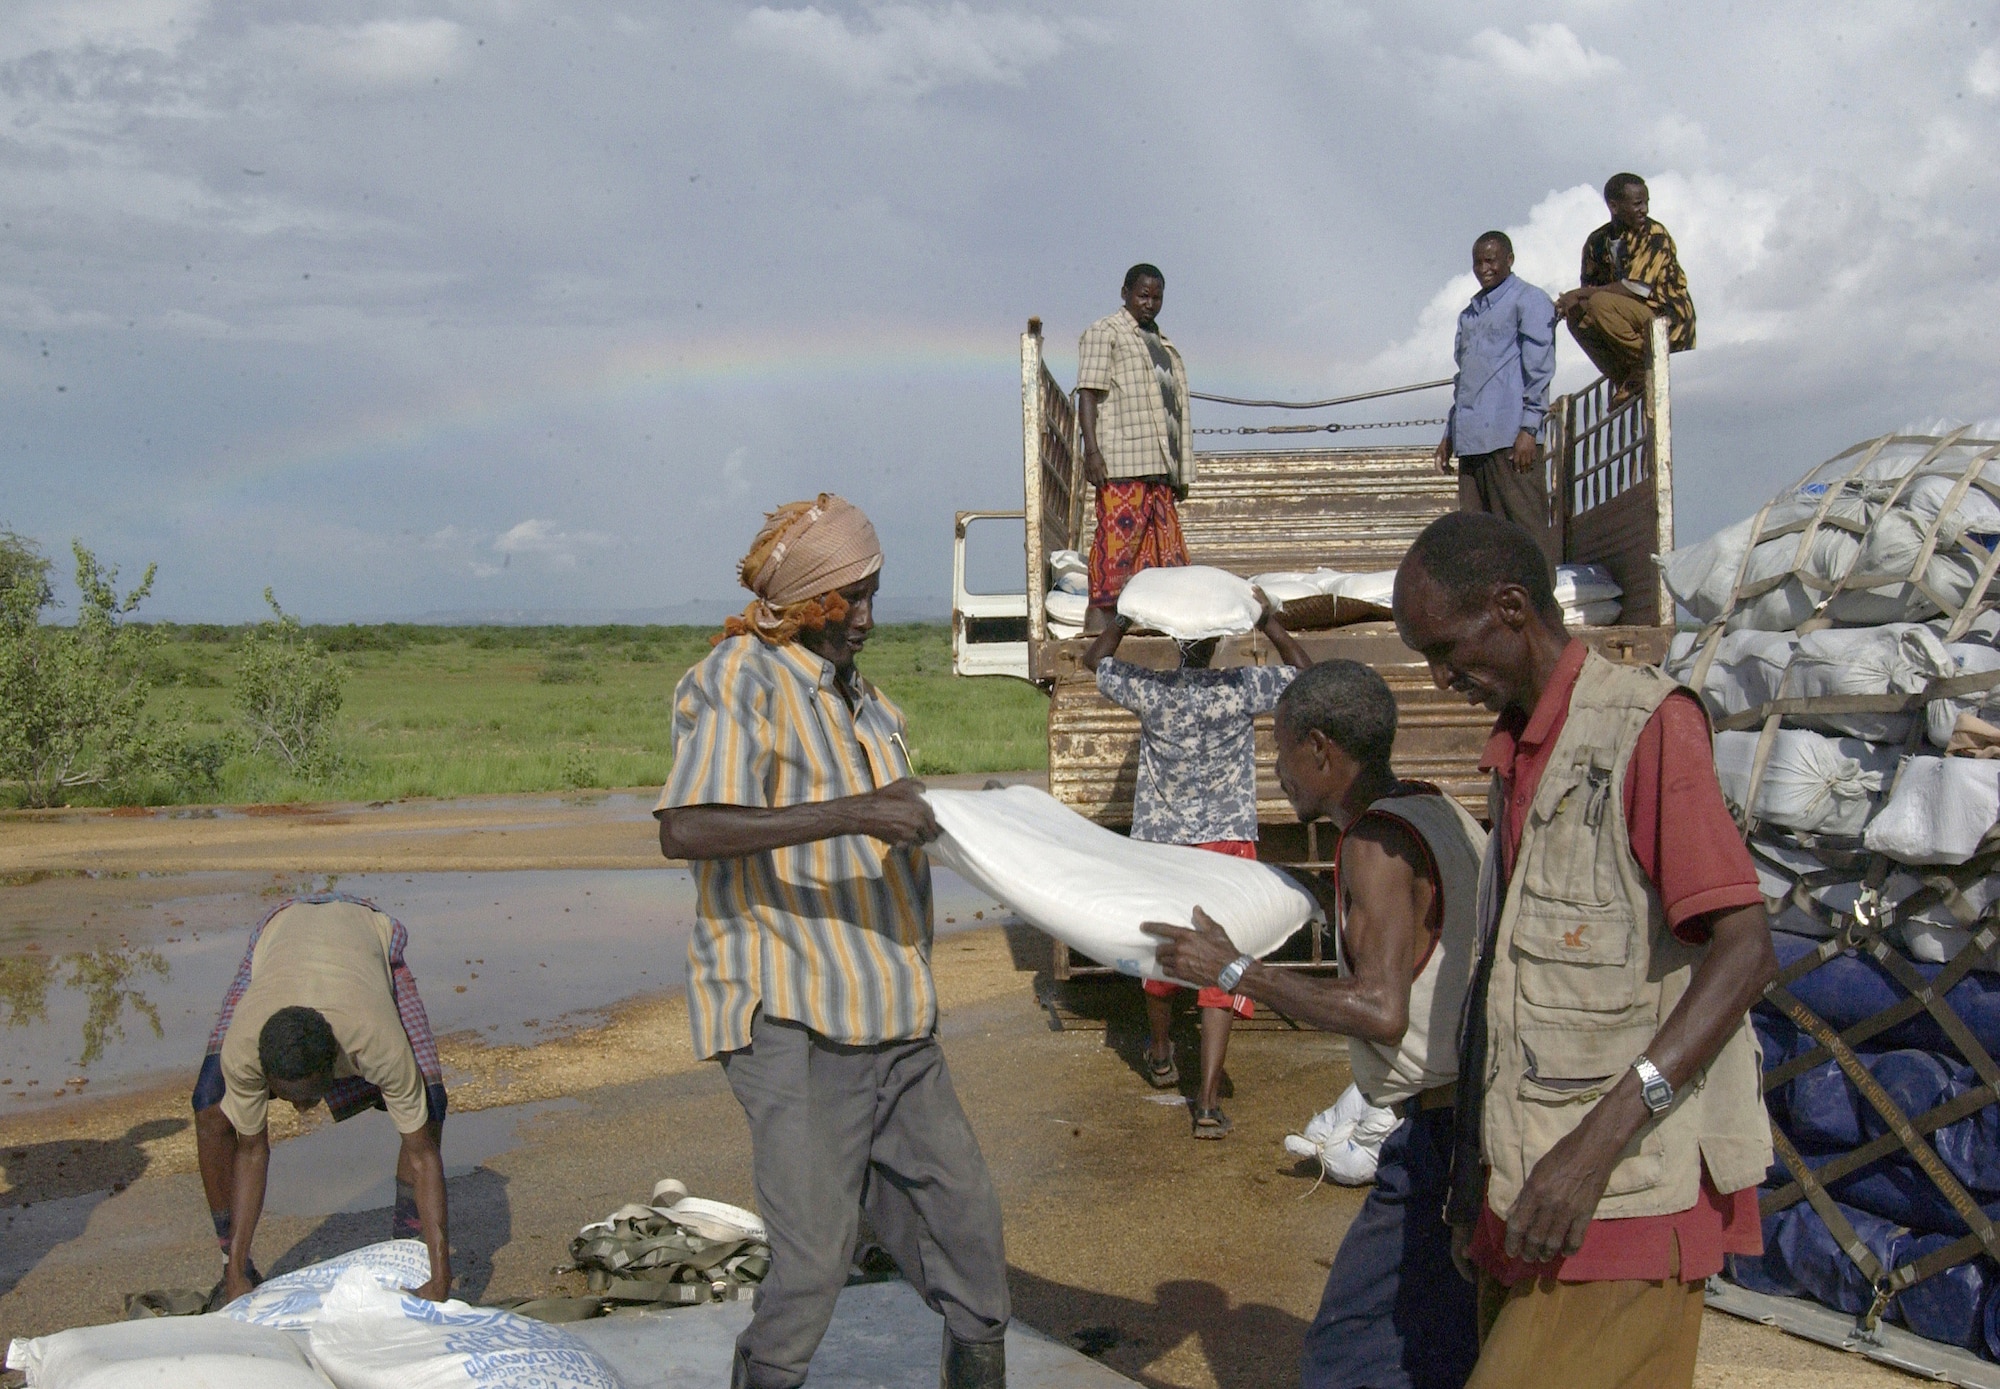 Local Ethiopians gather supplies on the taxiway in Gode, Ethiopia. C-130 Hercules aircraft assigned to Combined Joint Task Force - Horn of Africa delivered humanitarian aid to flood victims in the Ogaden region of Ethiopia Nov. 10. (U.S. Navy photo/Master Chief Petty Officer Philip A. Fortnam) 

 
